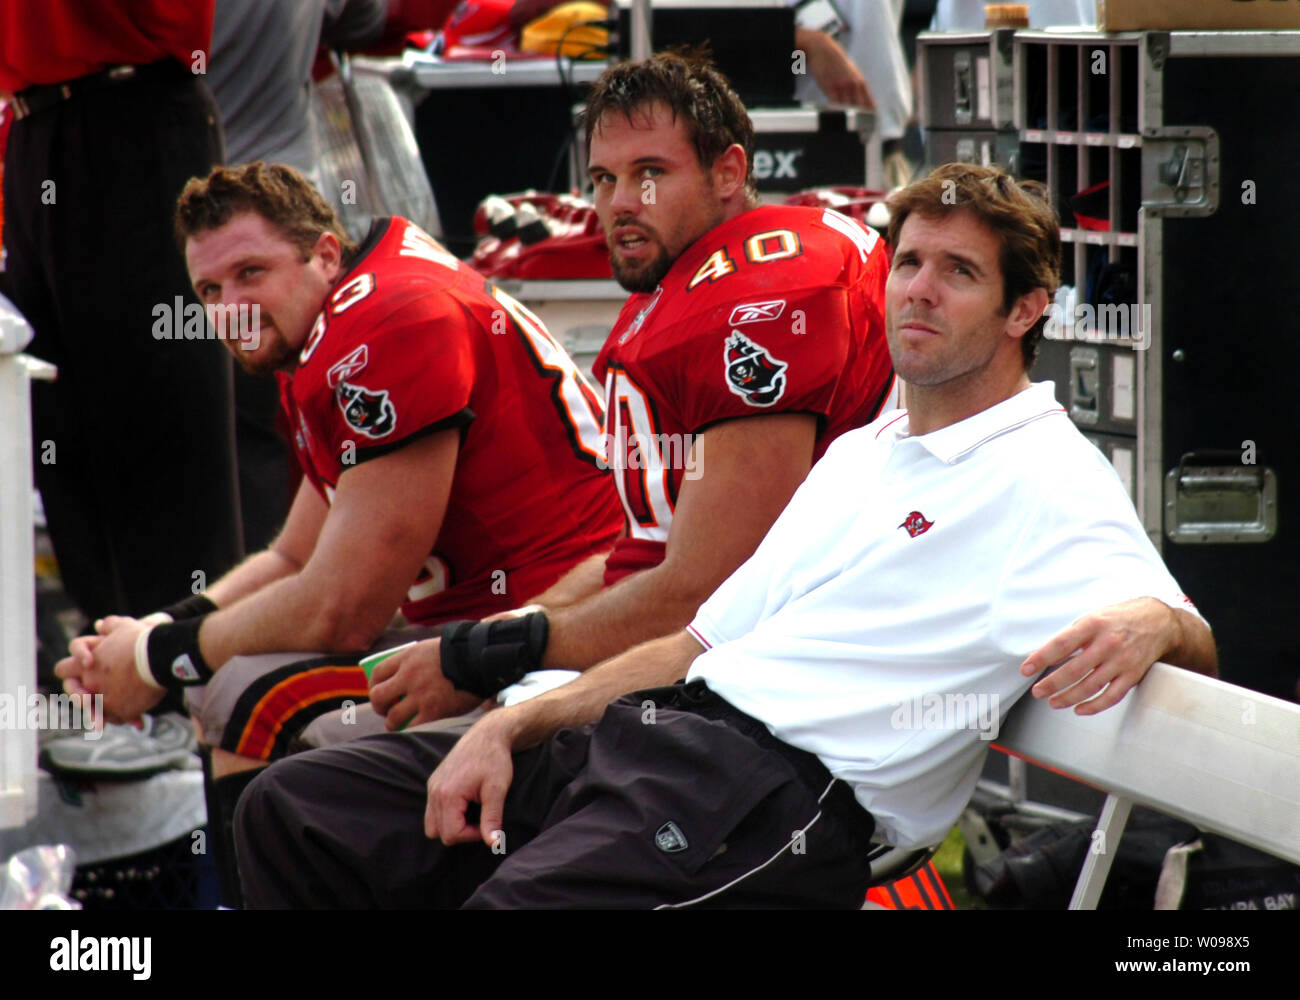 Tampa Bay Buccaneers' tight end Dave Moore (83) fullback Mike Alstott (40)  and injured quarterback Brian Griese watch a replay after Alstott scored a  touchdown during the fourth quarter in a game